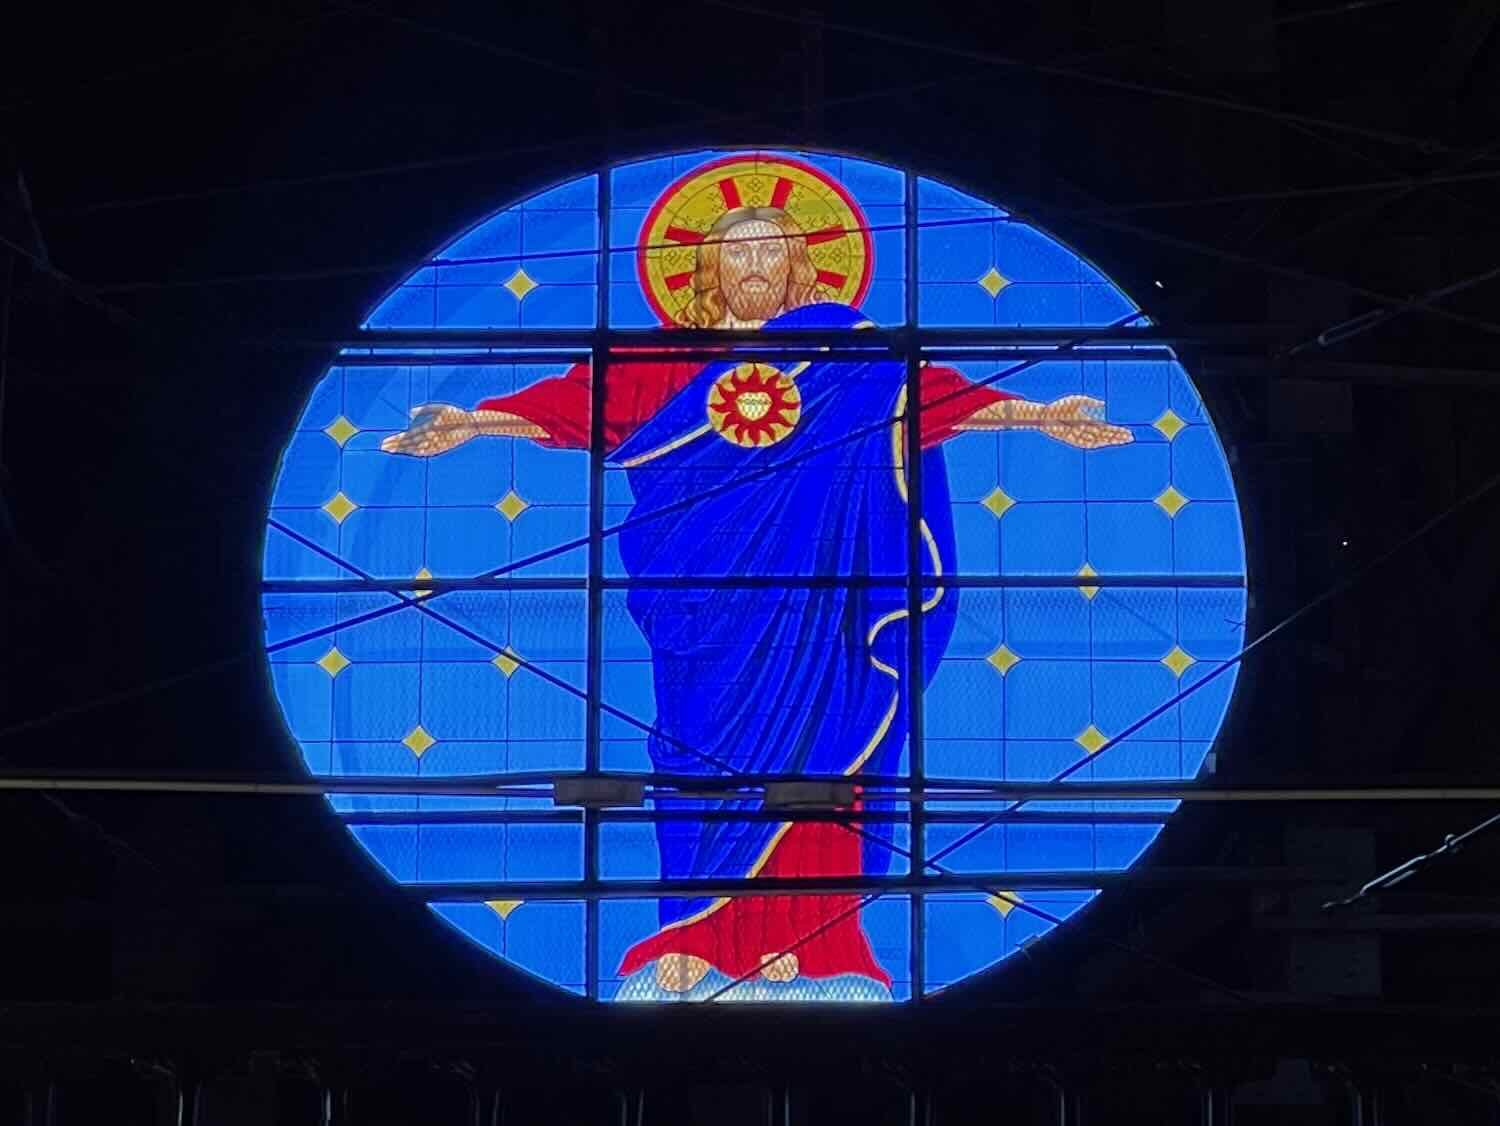 The large, brightly-colored, stained glass window over the entrance reflected the theme of Jesus's sacred heart